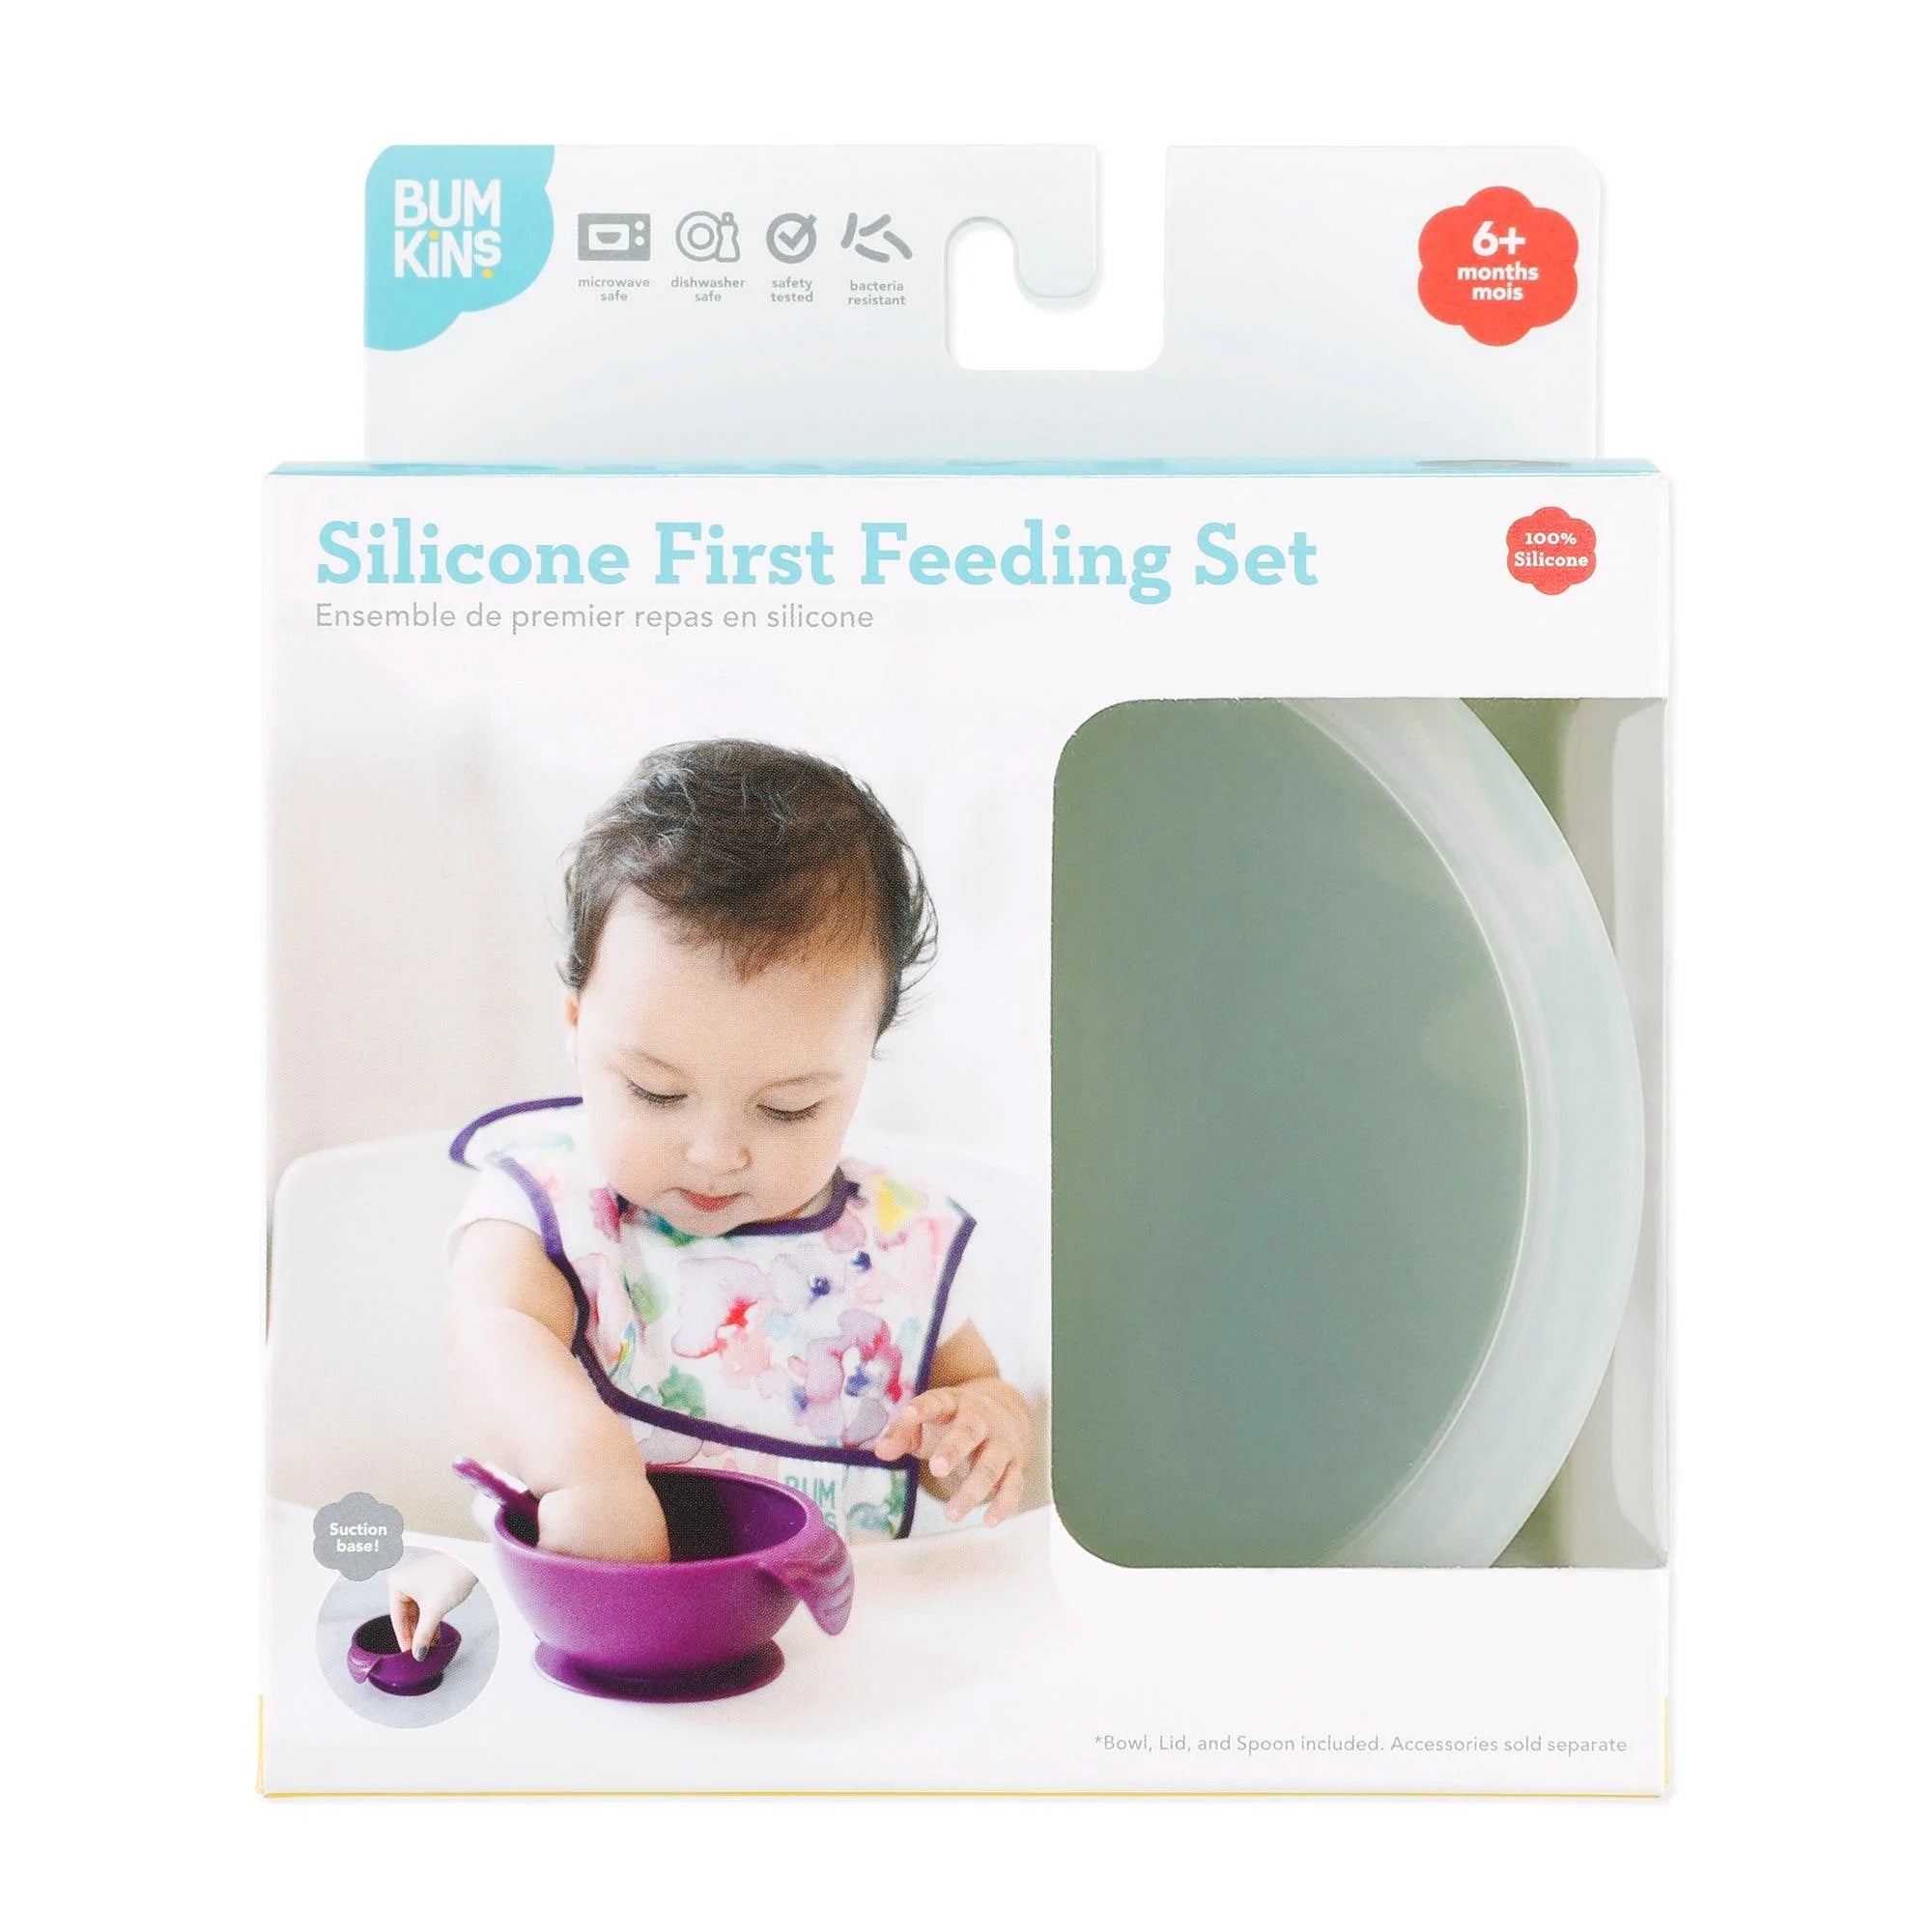 Baby's First Mealtime Essentials - Aseky + Co.